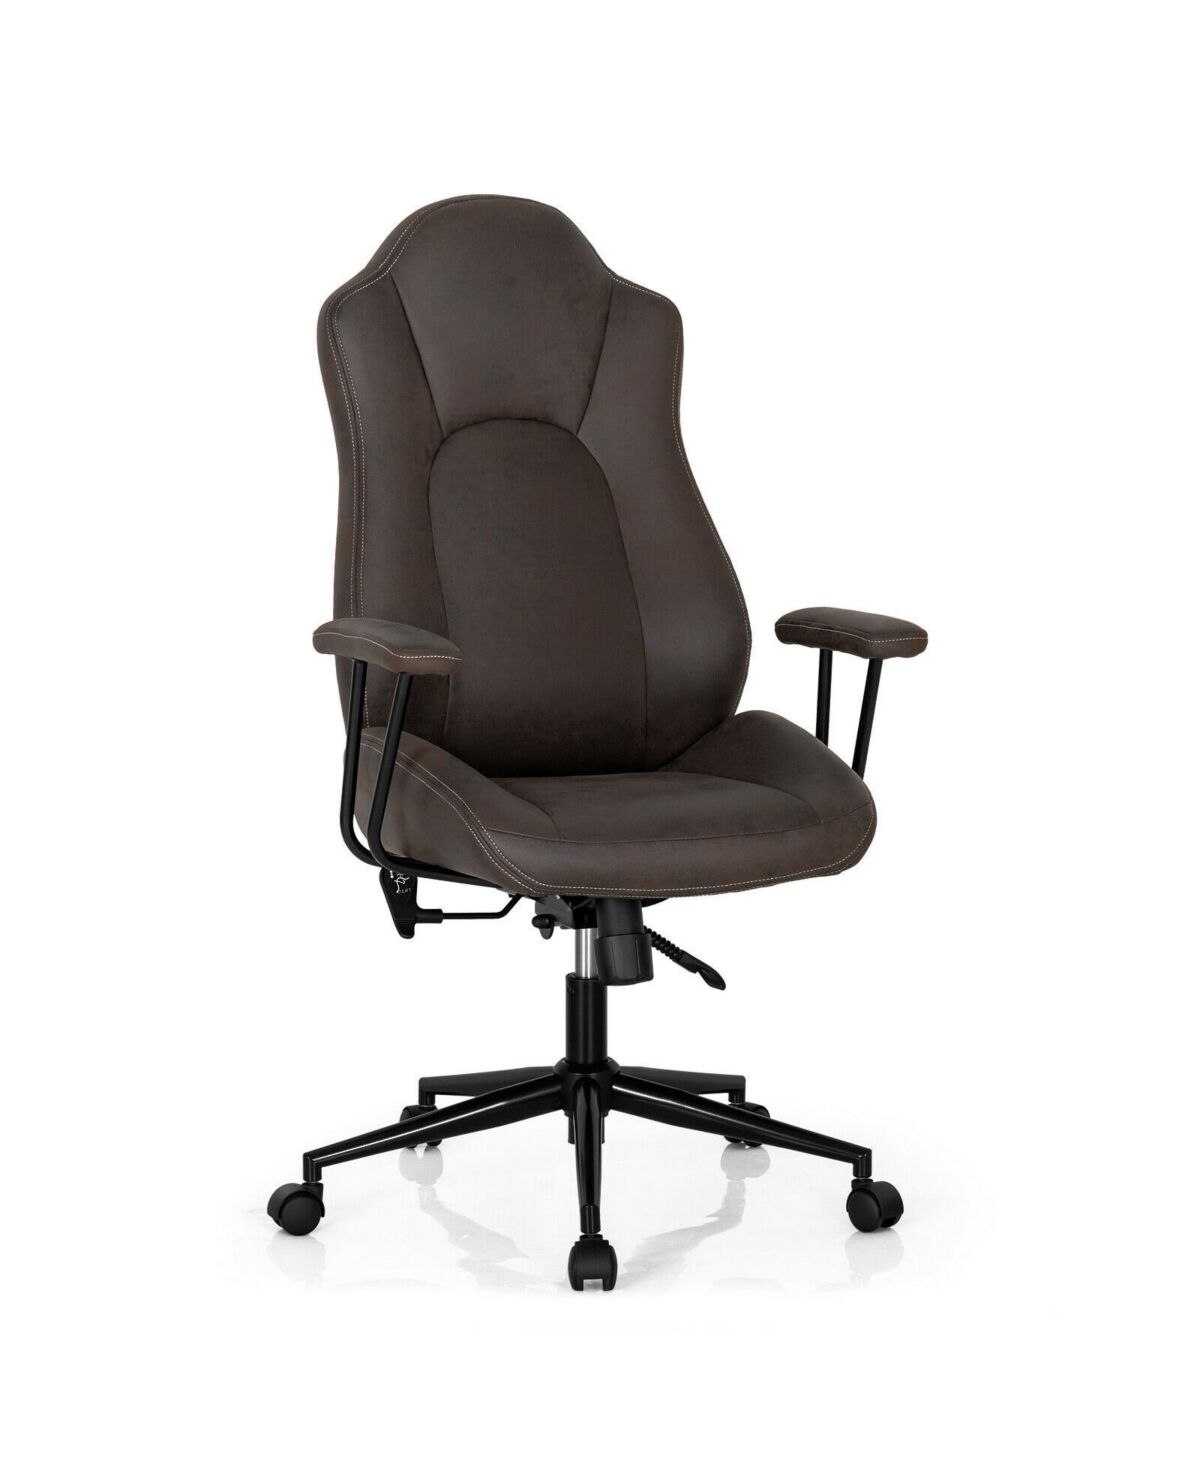 Slickblue High Adjustable Back Executive Office Chair with Armrest-Brown - Brown